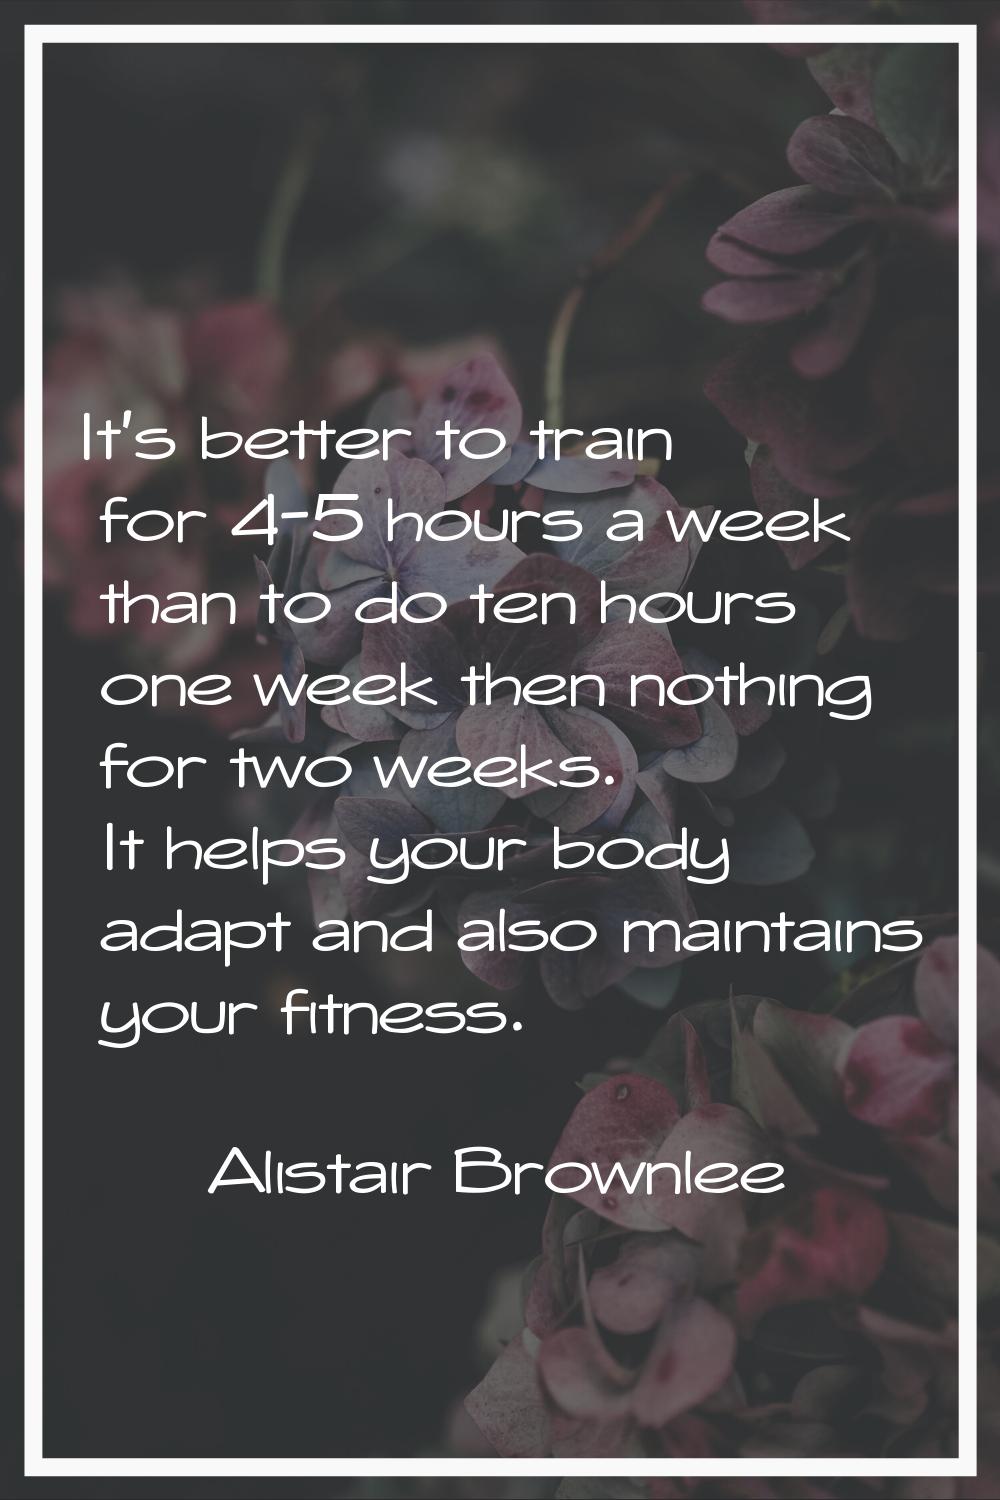 It's better to train for 4-5 hours a week than to do ten hours one week then nothing for two weeks.